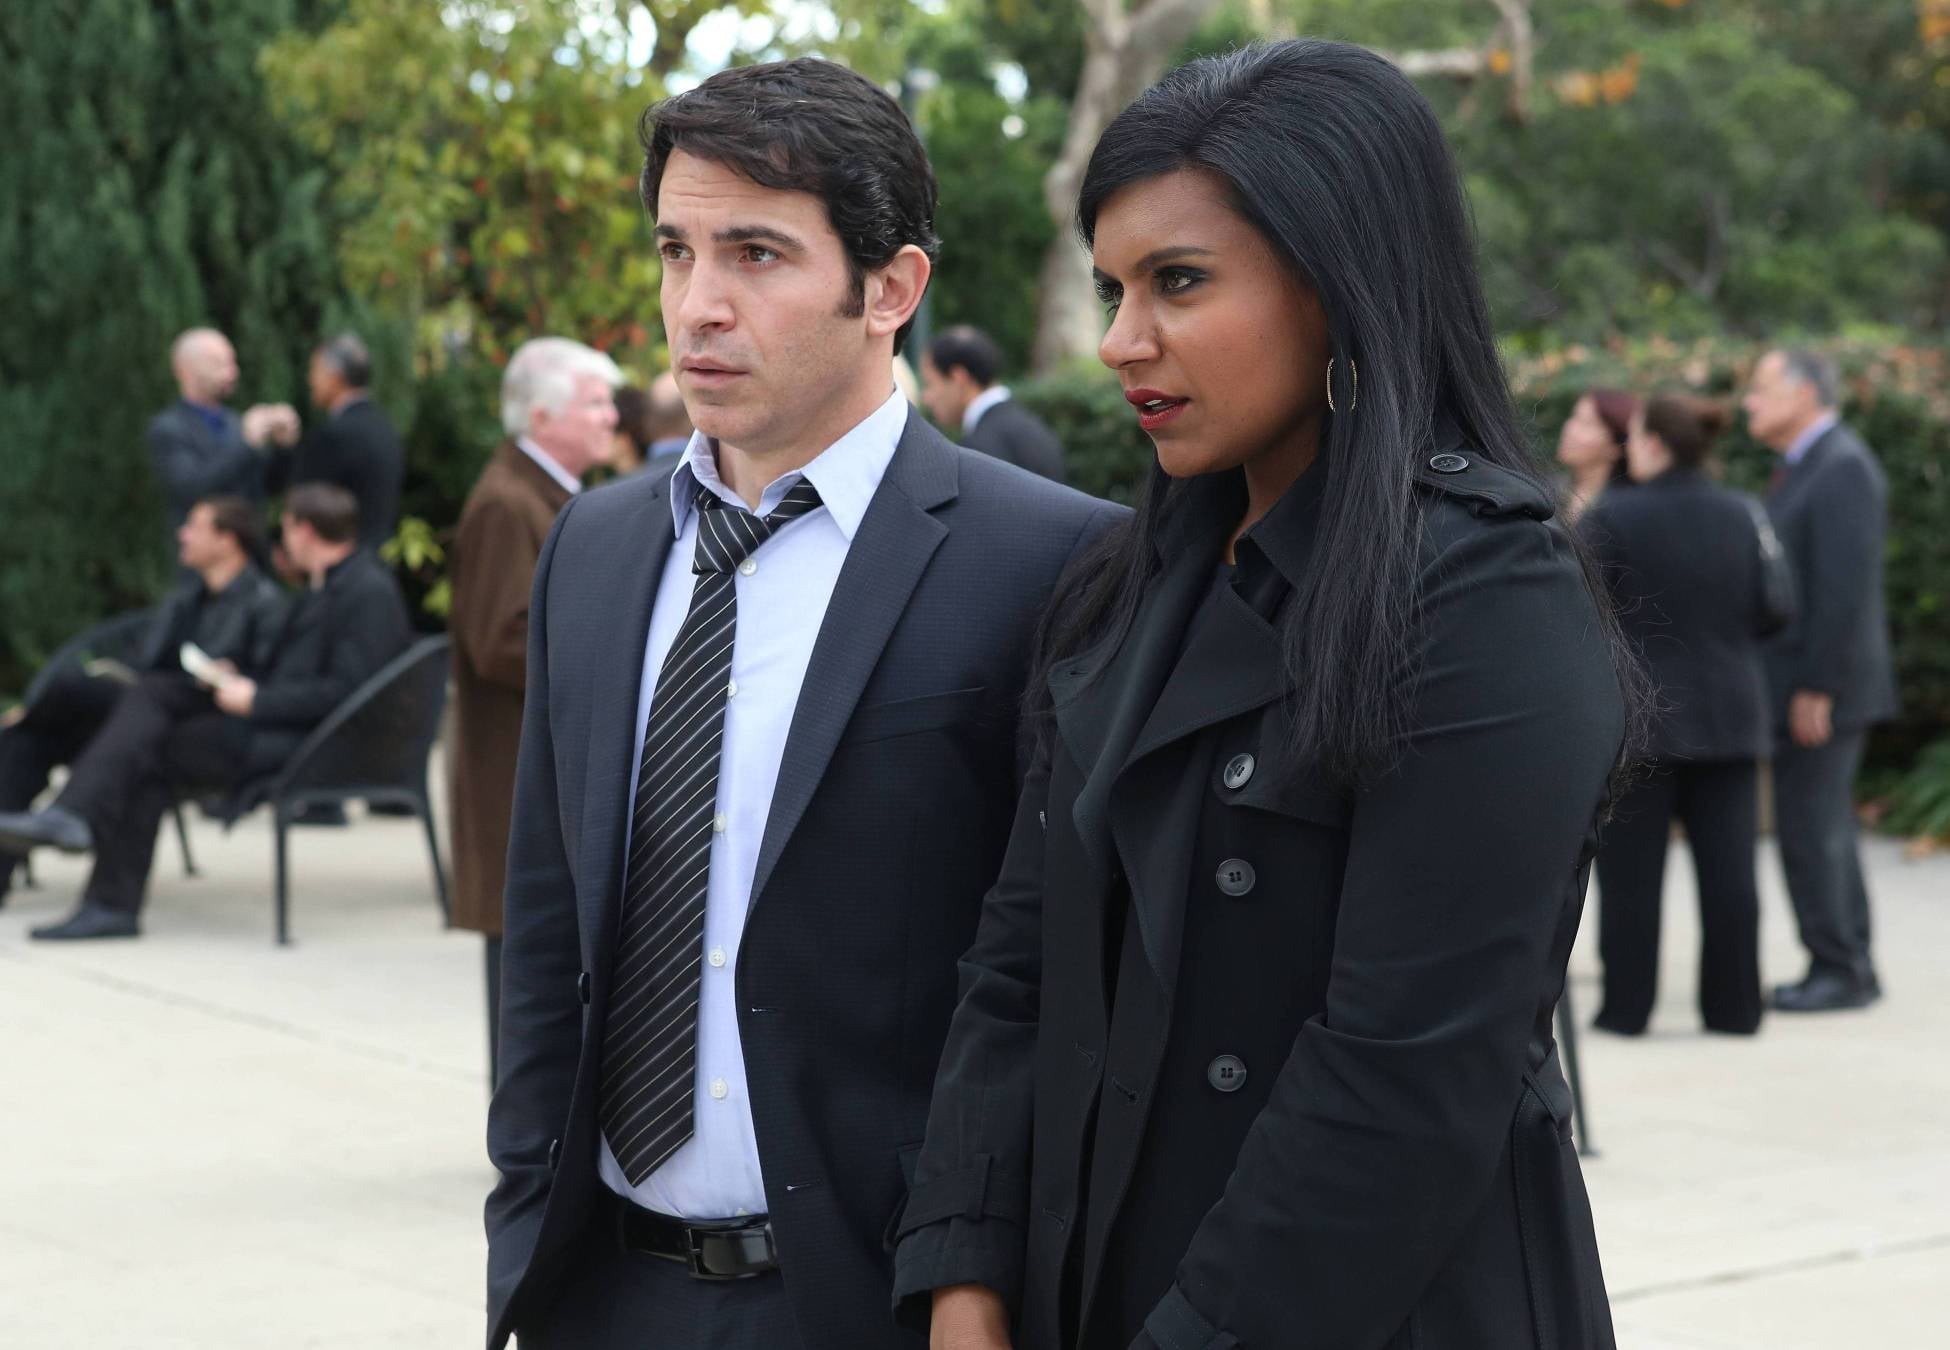 Mindy and Danny on The Mindy Project.